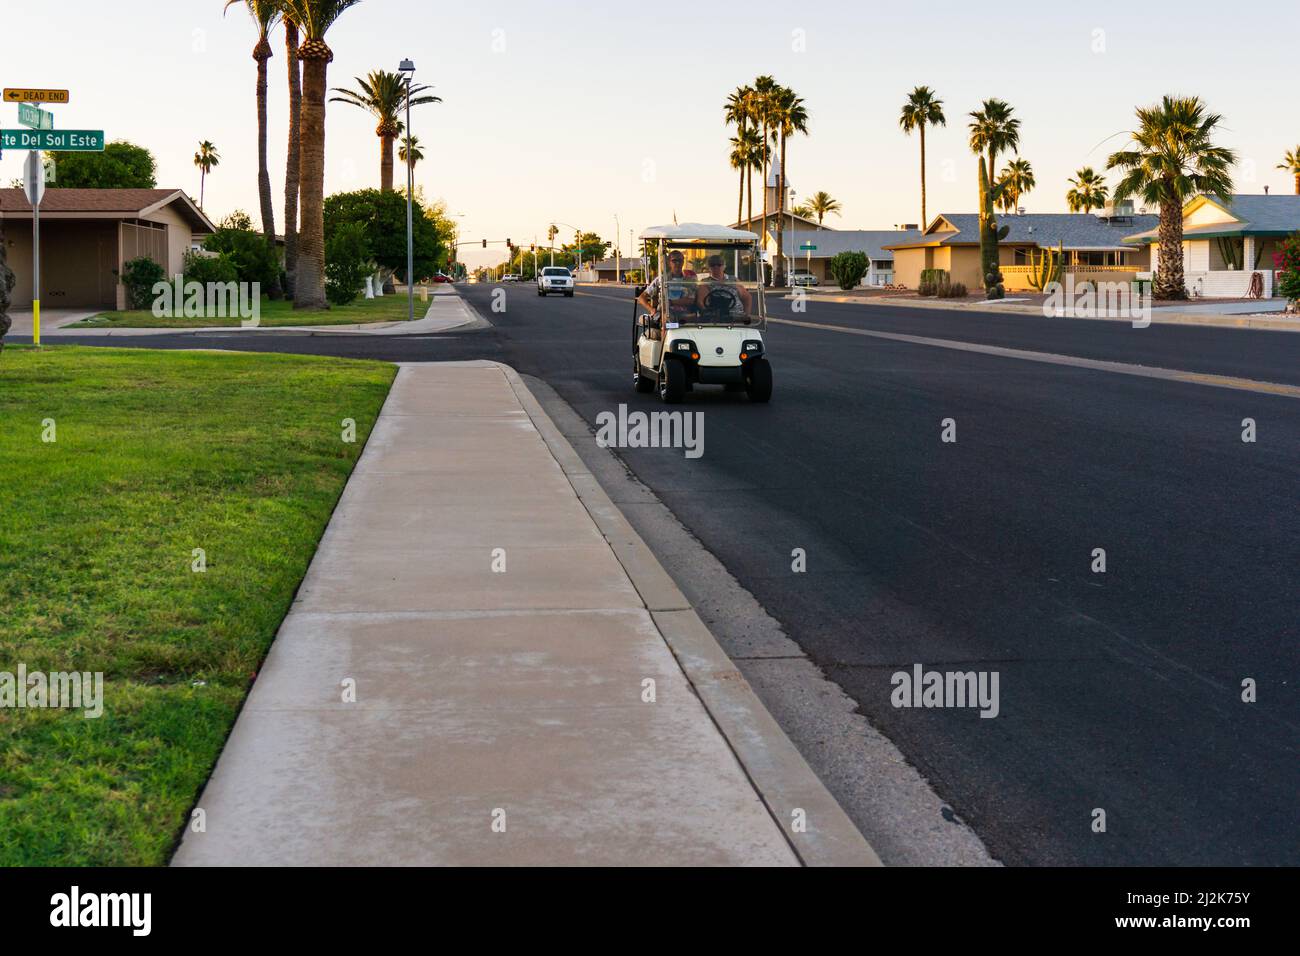 Old couple driving a golf cart on a large street in Sun City, Arizona, U.S.A. Stock Photo